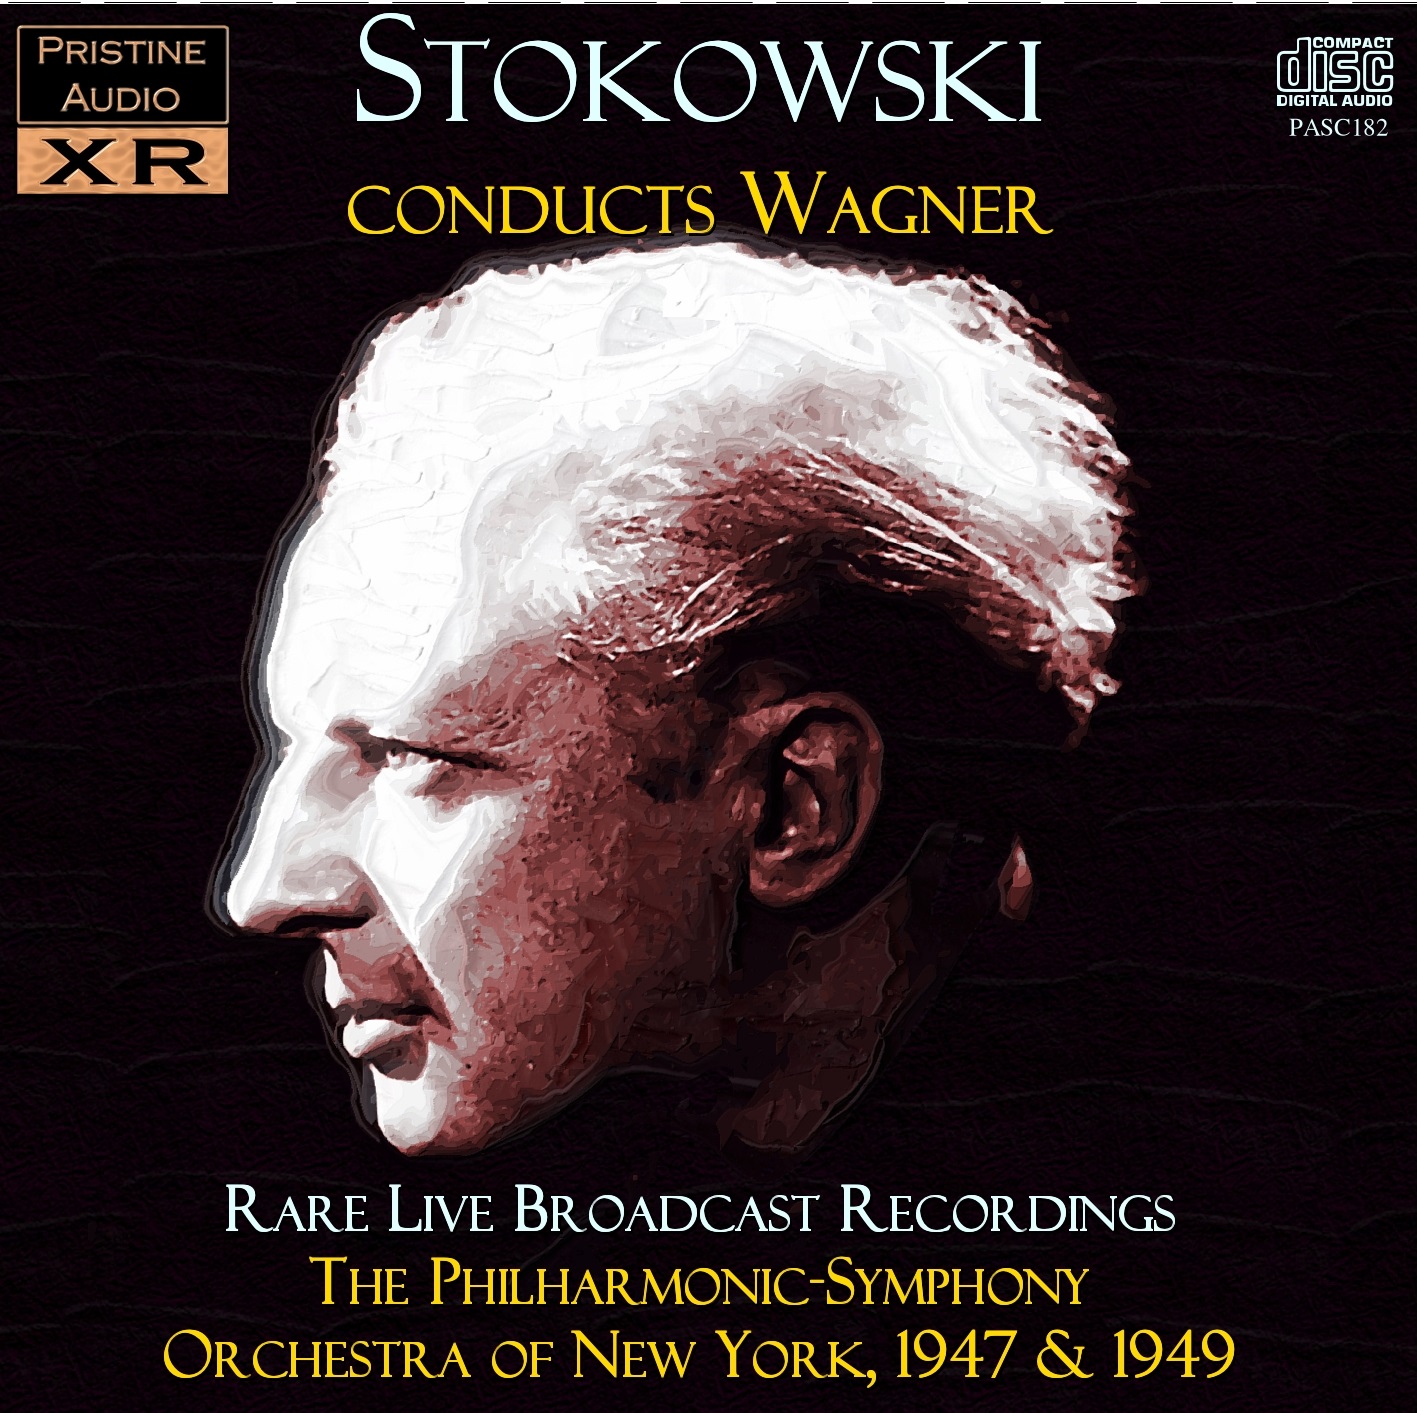 Diabolus In Musica: (24-48) Stokowski conducts Wagner